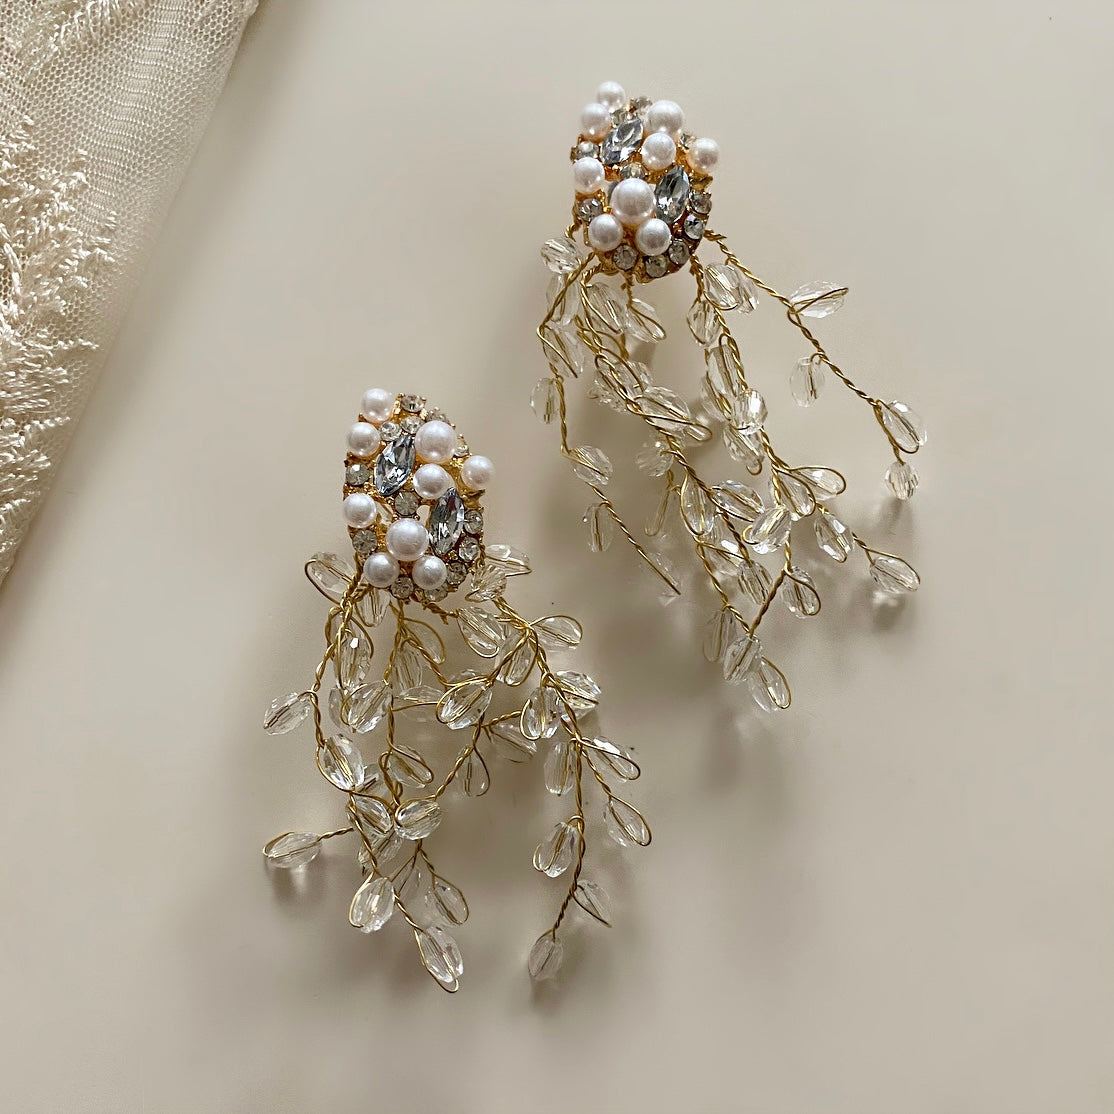 The Renè Crystal Drop Earrings combine the timeless elegance of pearls with the glamorous sparkle of crystals. Constructed with unique detail, this stylish piece is sure to add a touch of grace to any look.